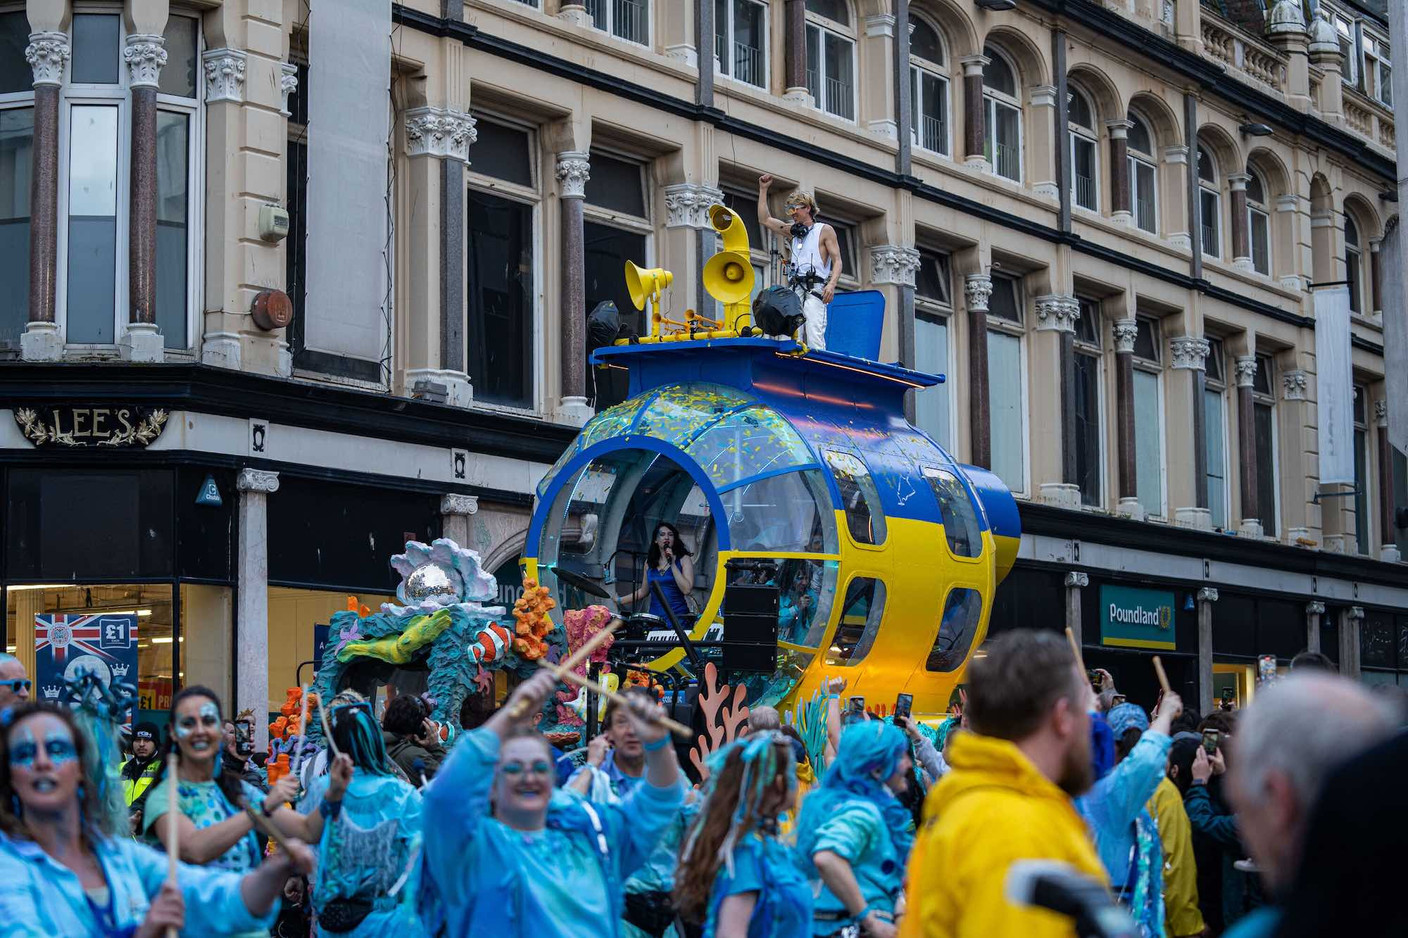 The Blue and Yellow Submarine Parade, part of the Eurofestival organised by the Liverpool committee, 5 May 2023. Photo: Visit Liverpool